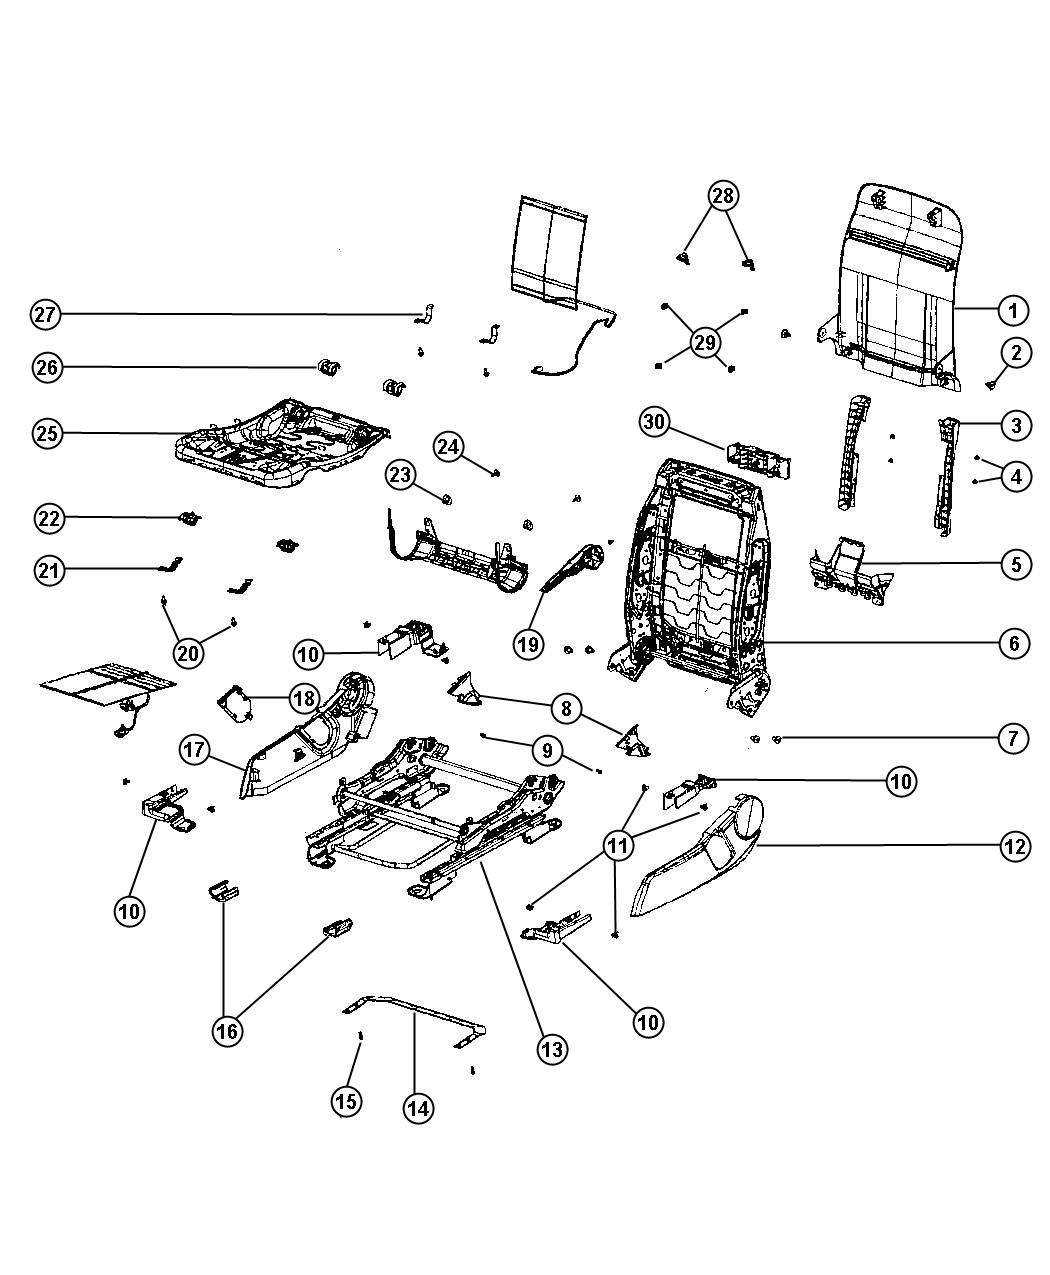 Adjusters , Recliners and Shields - Passenger - Manual - Non-Fold Flat. Diagram